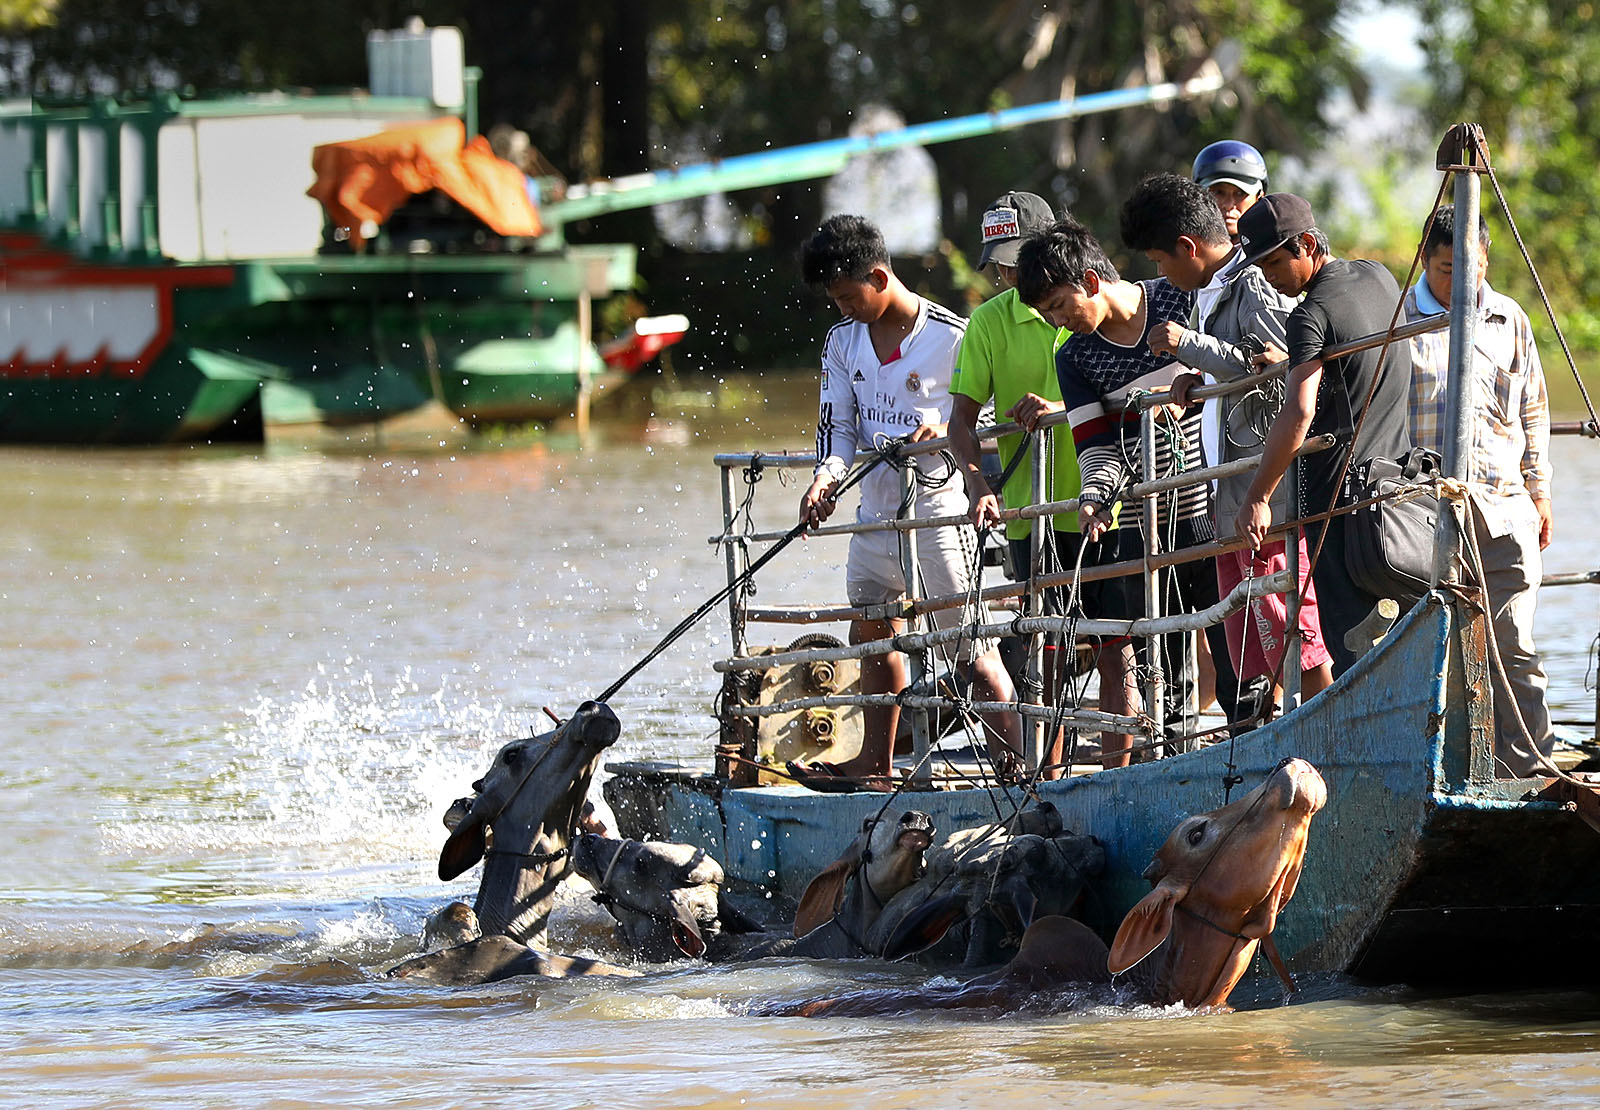 ​Cambodian cows for sale: A special market in southern Vietnam